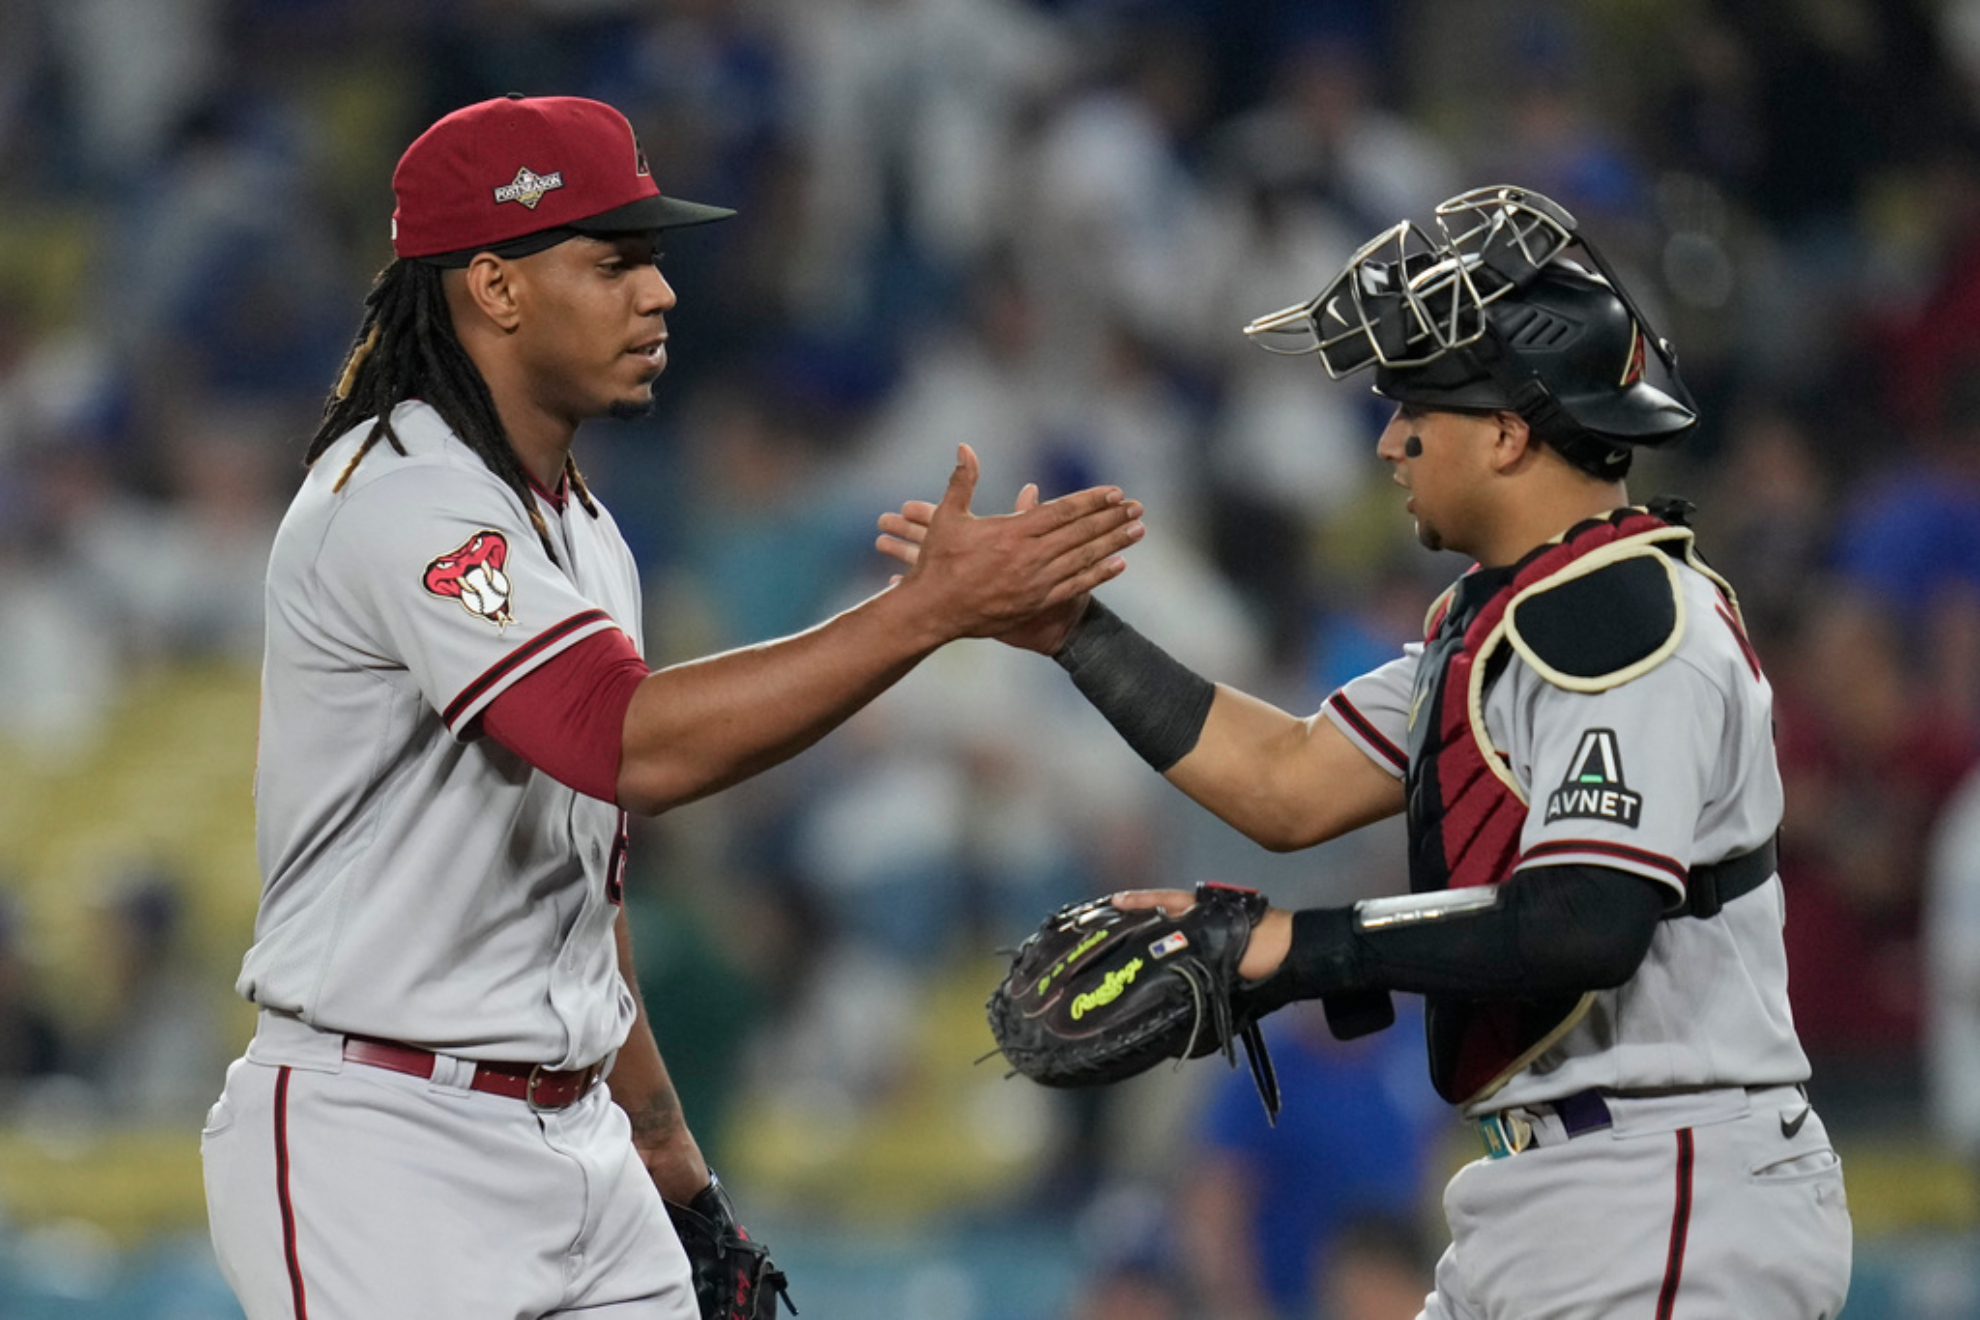 MLB Playoffs: Diamondbacks poisonous bite paralyzes Kershaw and the Dodgers in Game 1 of NL Divisional Series